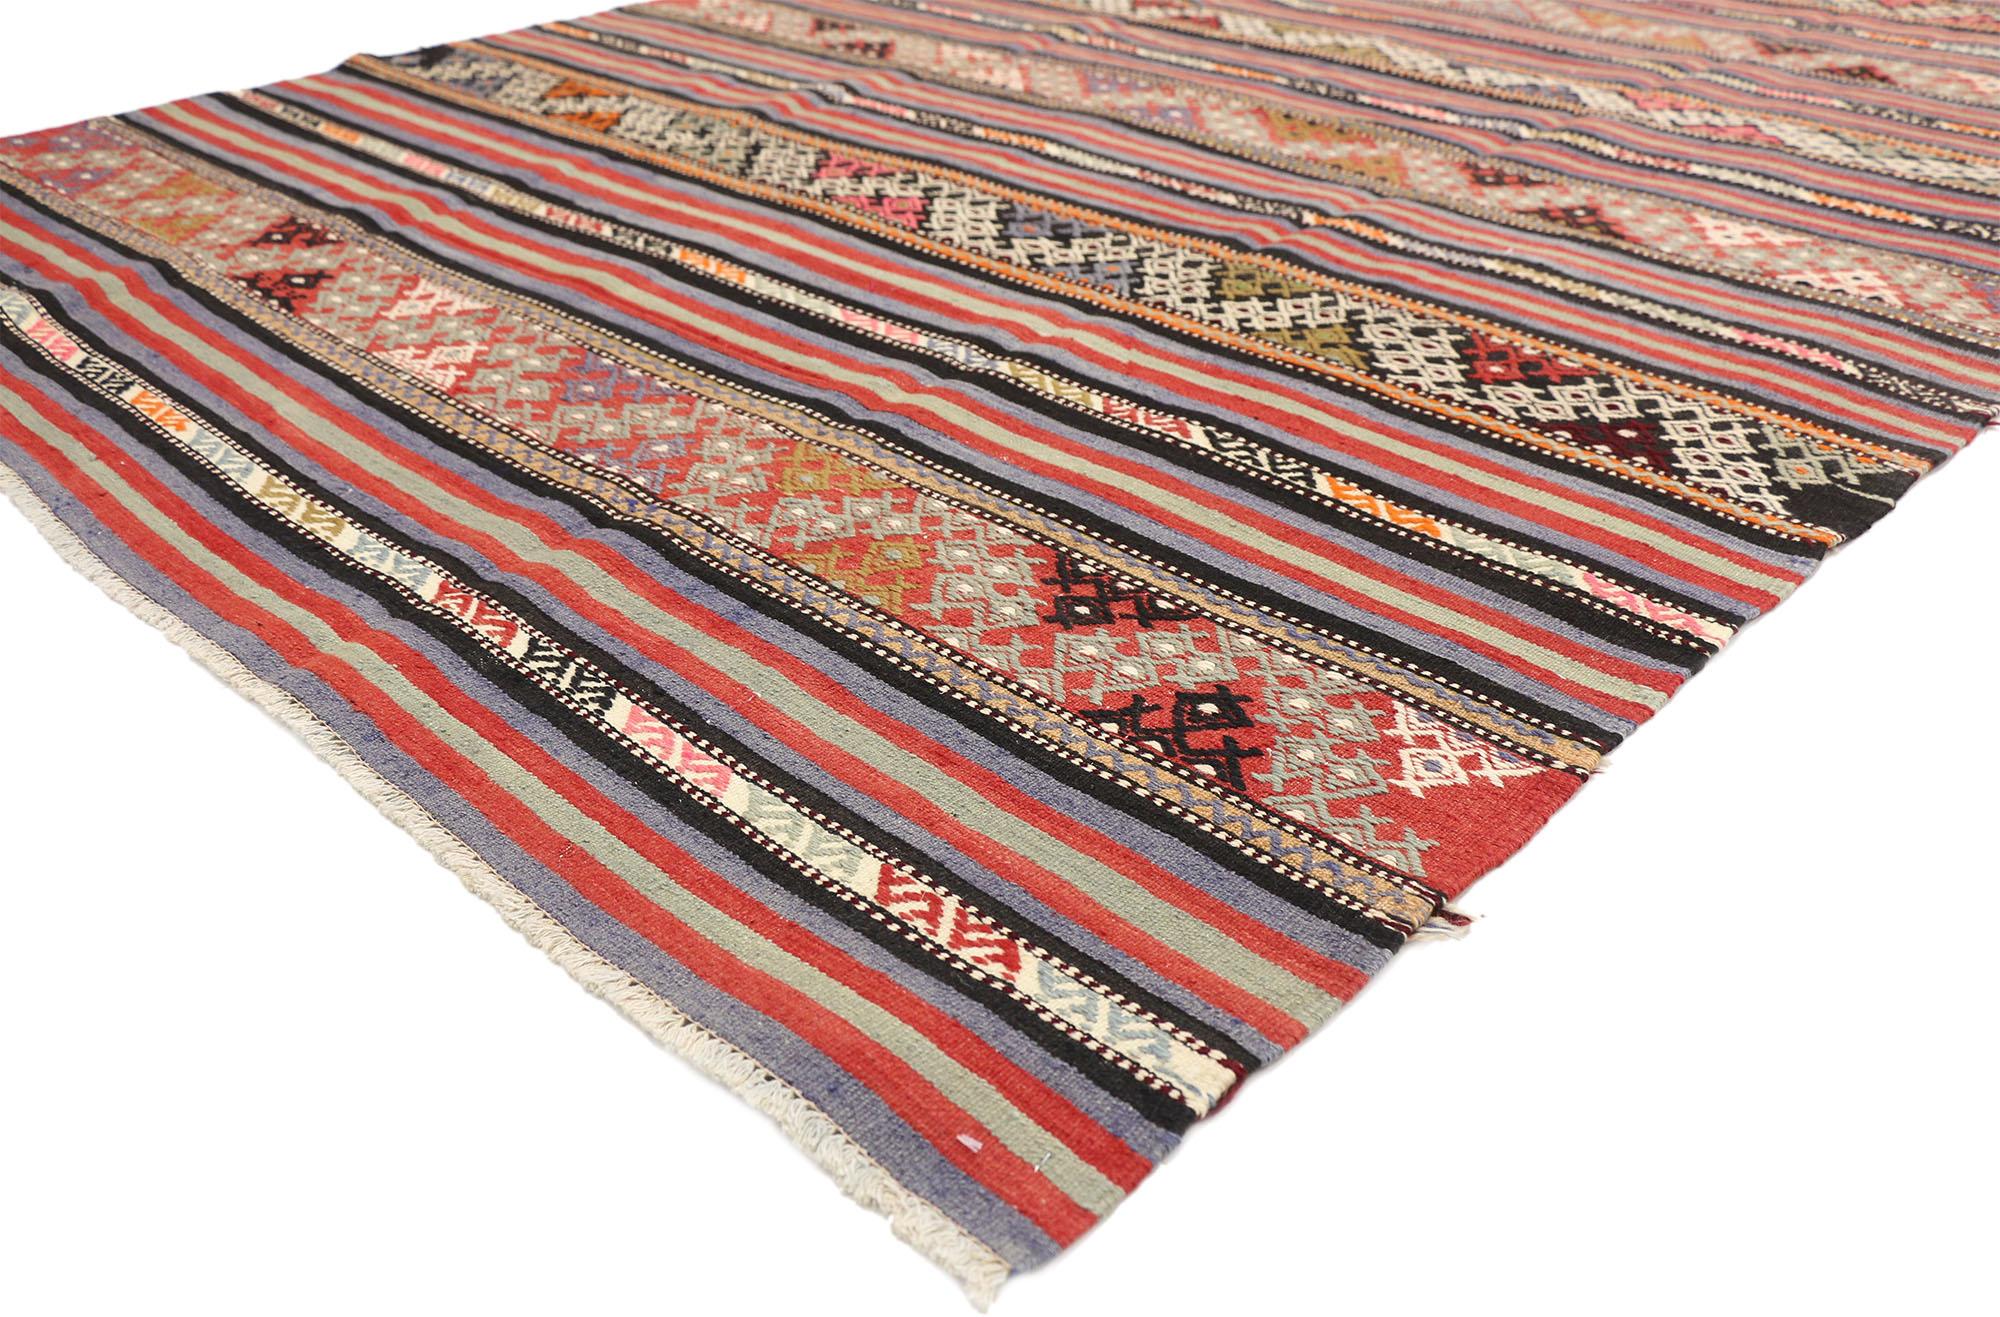 51319, Vintage Turkish striped Kilim rug with Modern Boho Chic Tribal style. Full of tiny details and a bold expressive design combined with exuberant colors and bohemian style, this hand-woven wool vintage Turkish Kilim rug is a captivating vision